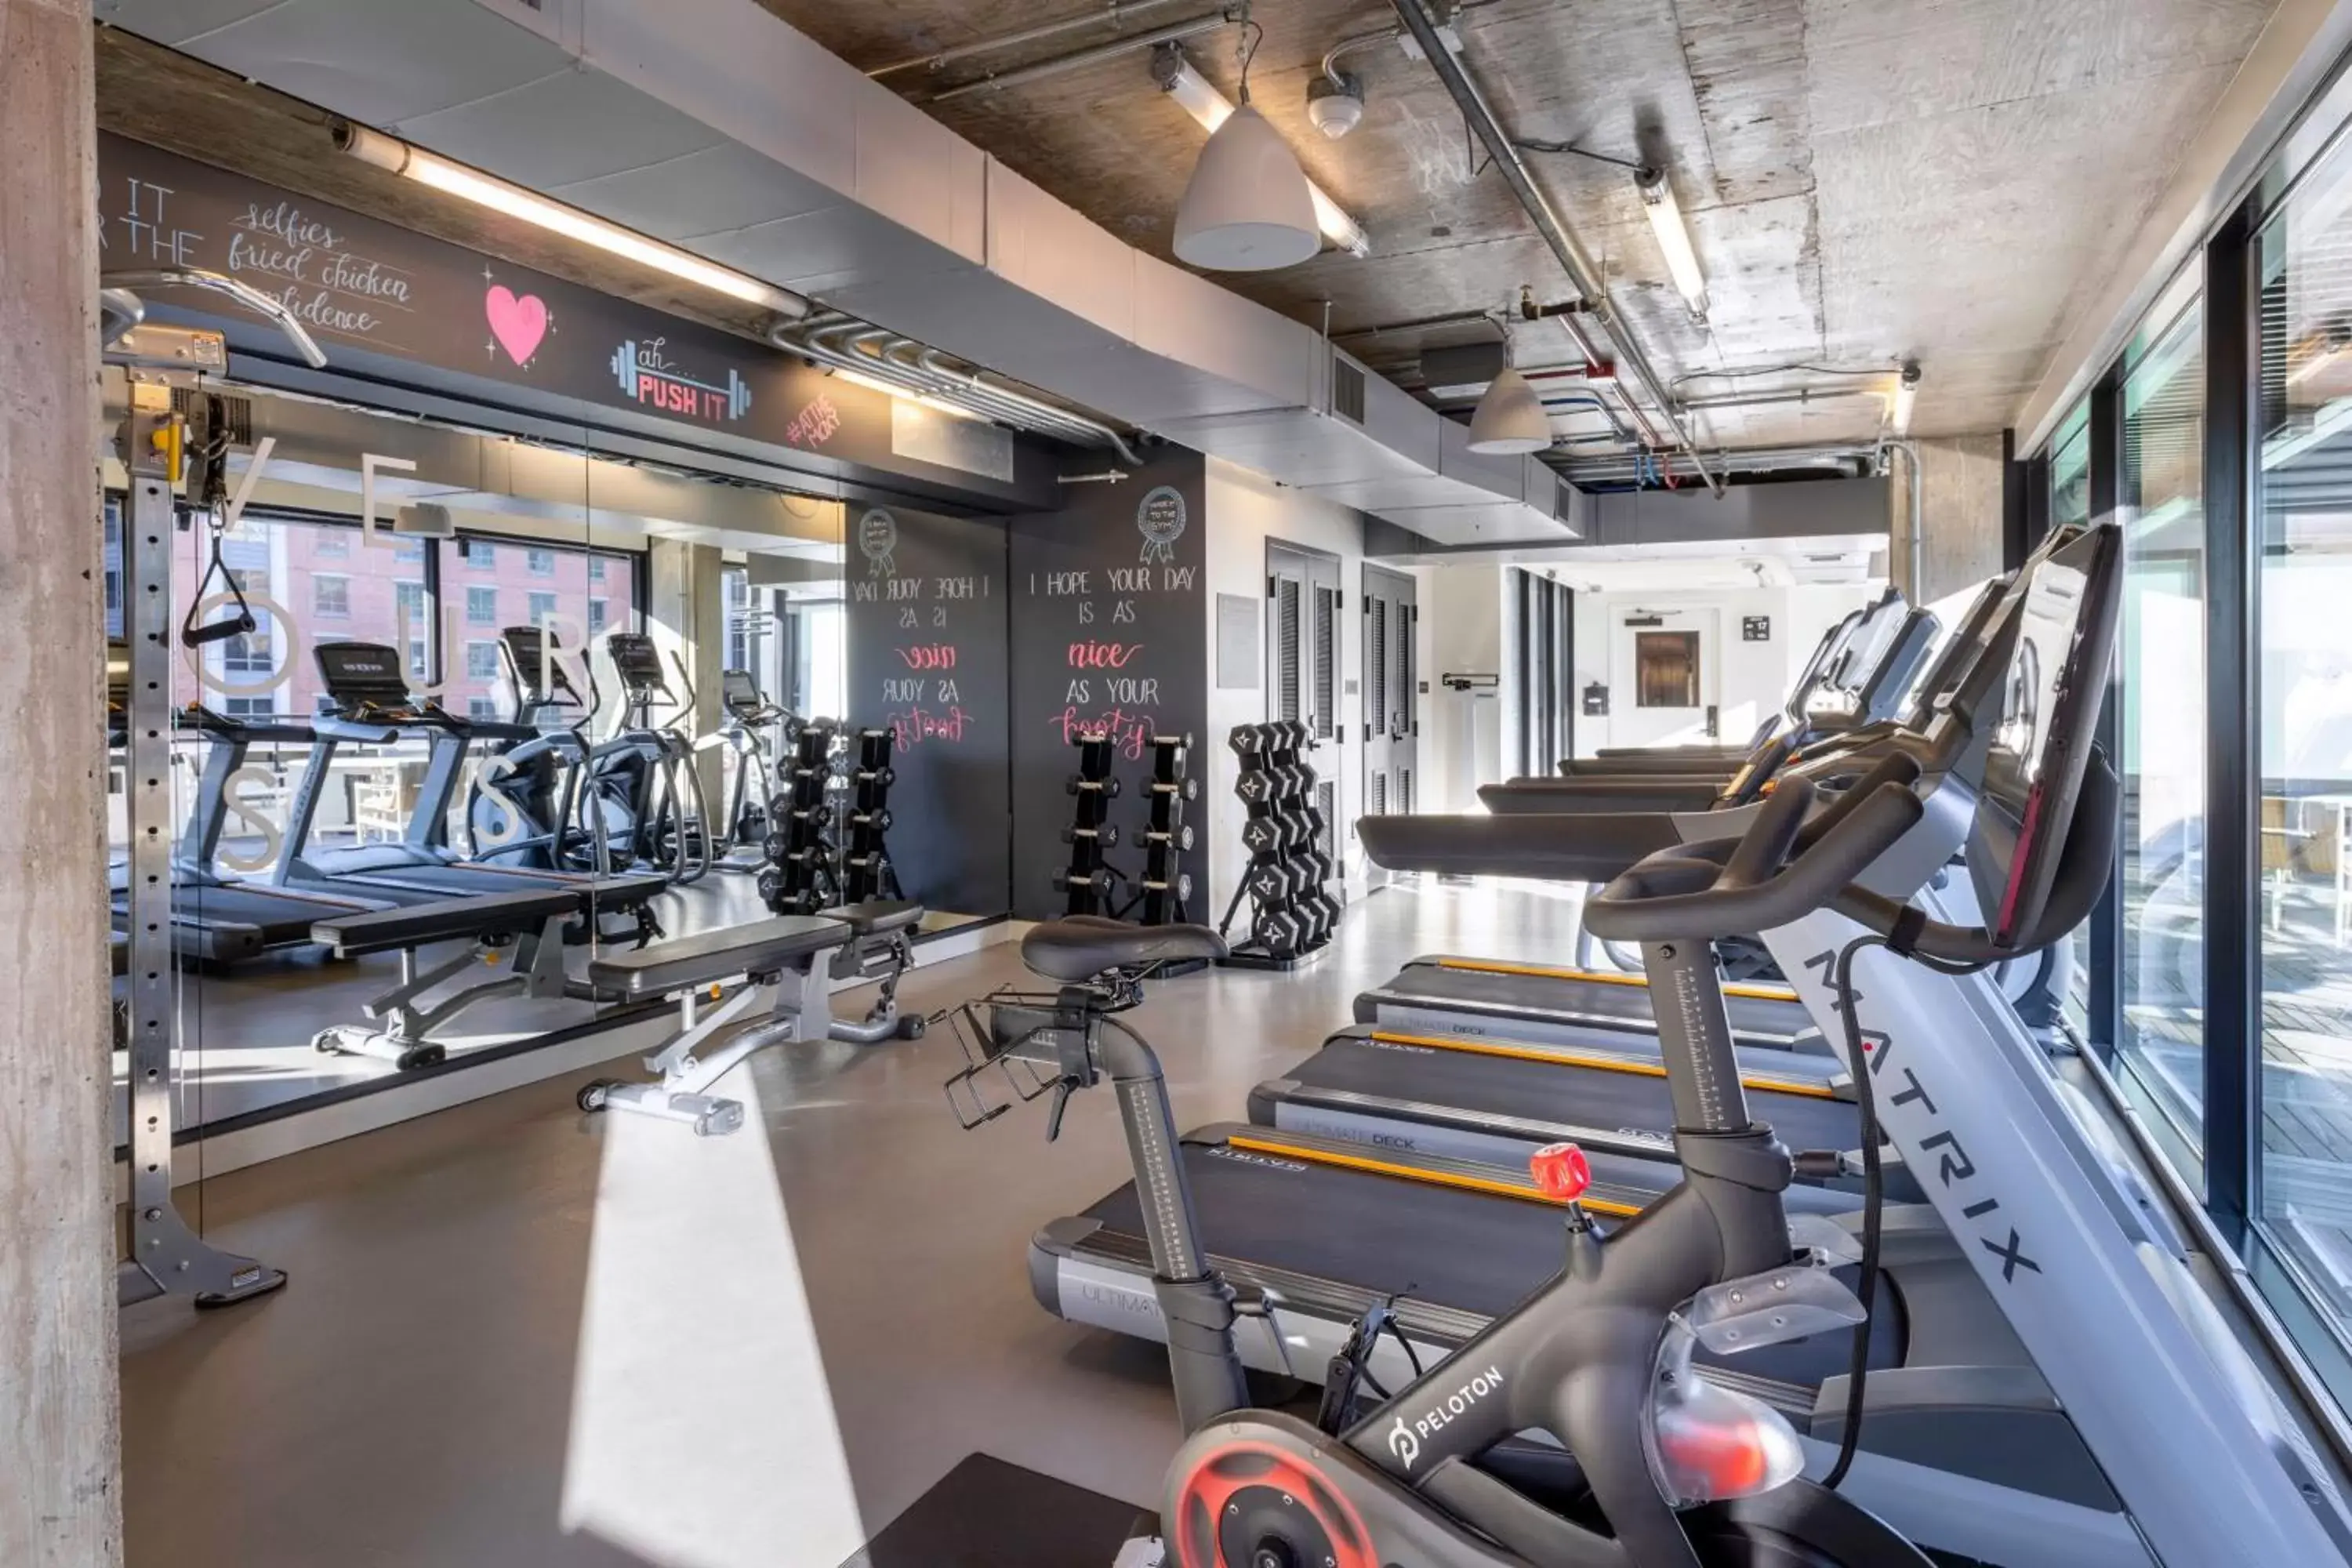 Fitness centre/facilities, Fitness Center/Facilities in Moxy Washington, DC Downtown